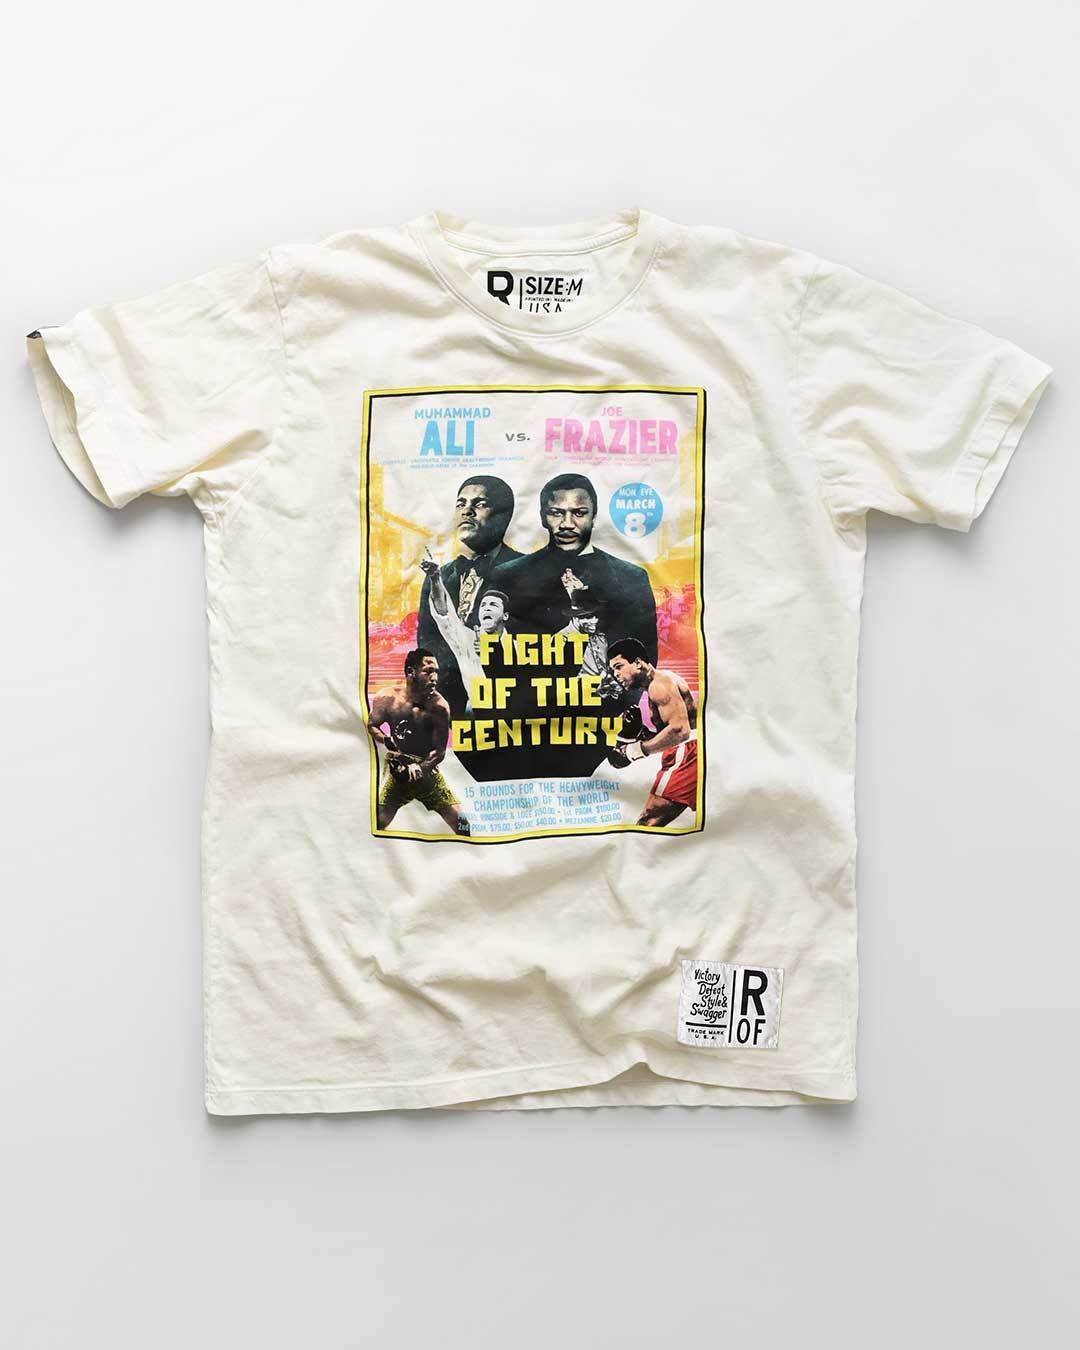 FOTC - Ali/Frazier White Photo Tee - Roots of Fight